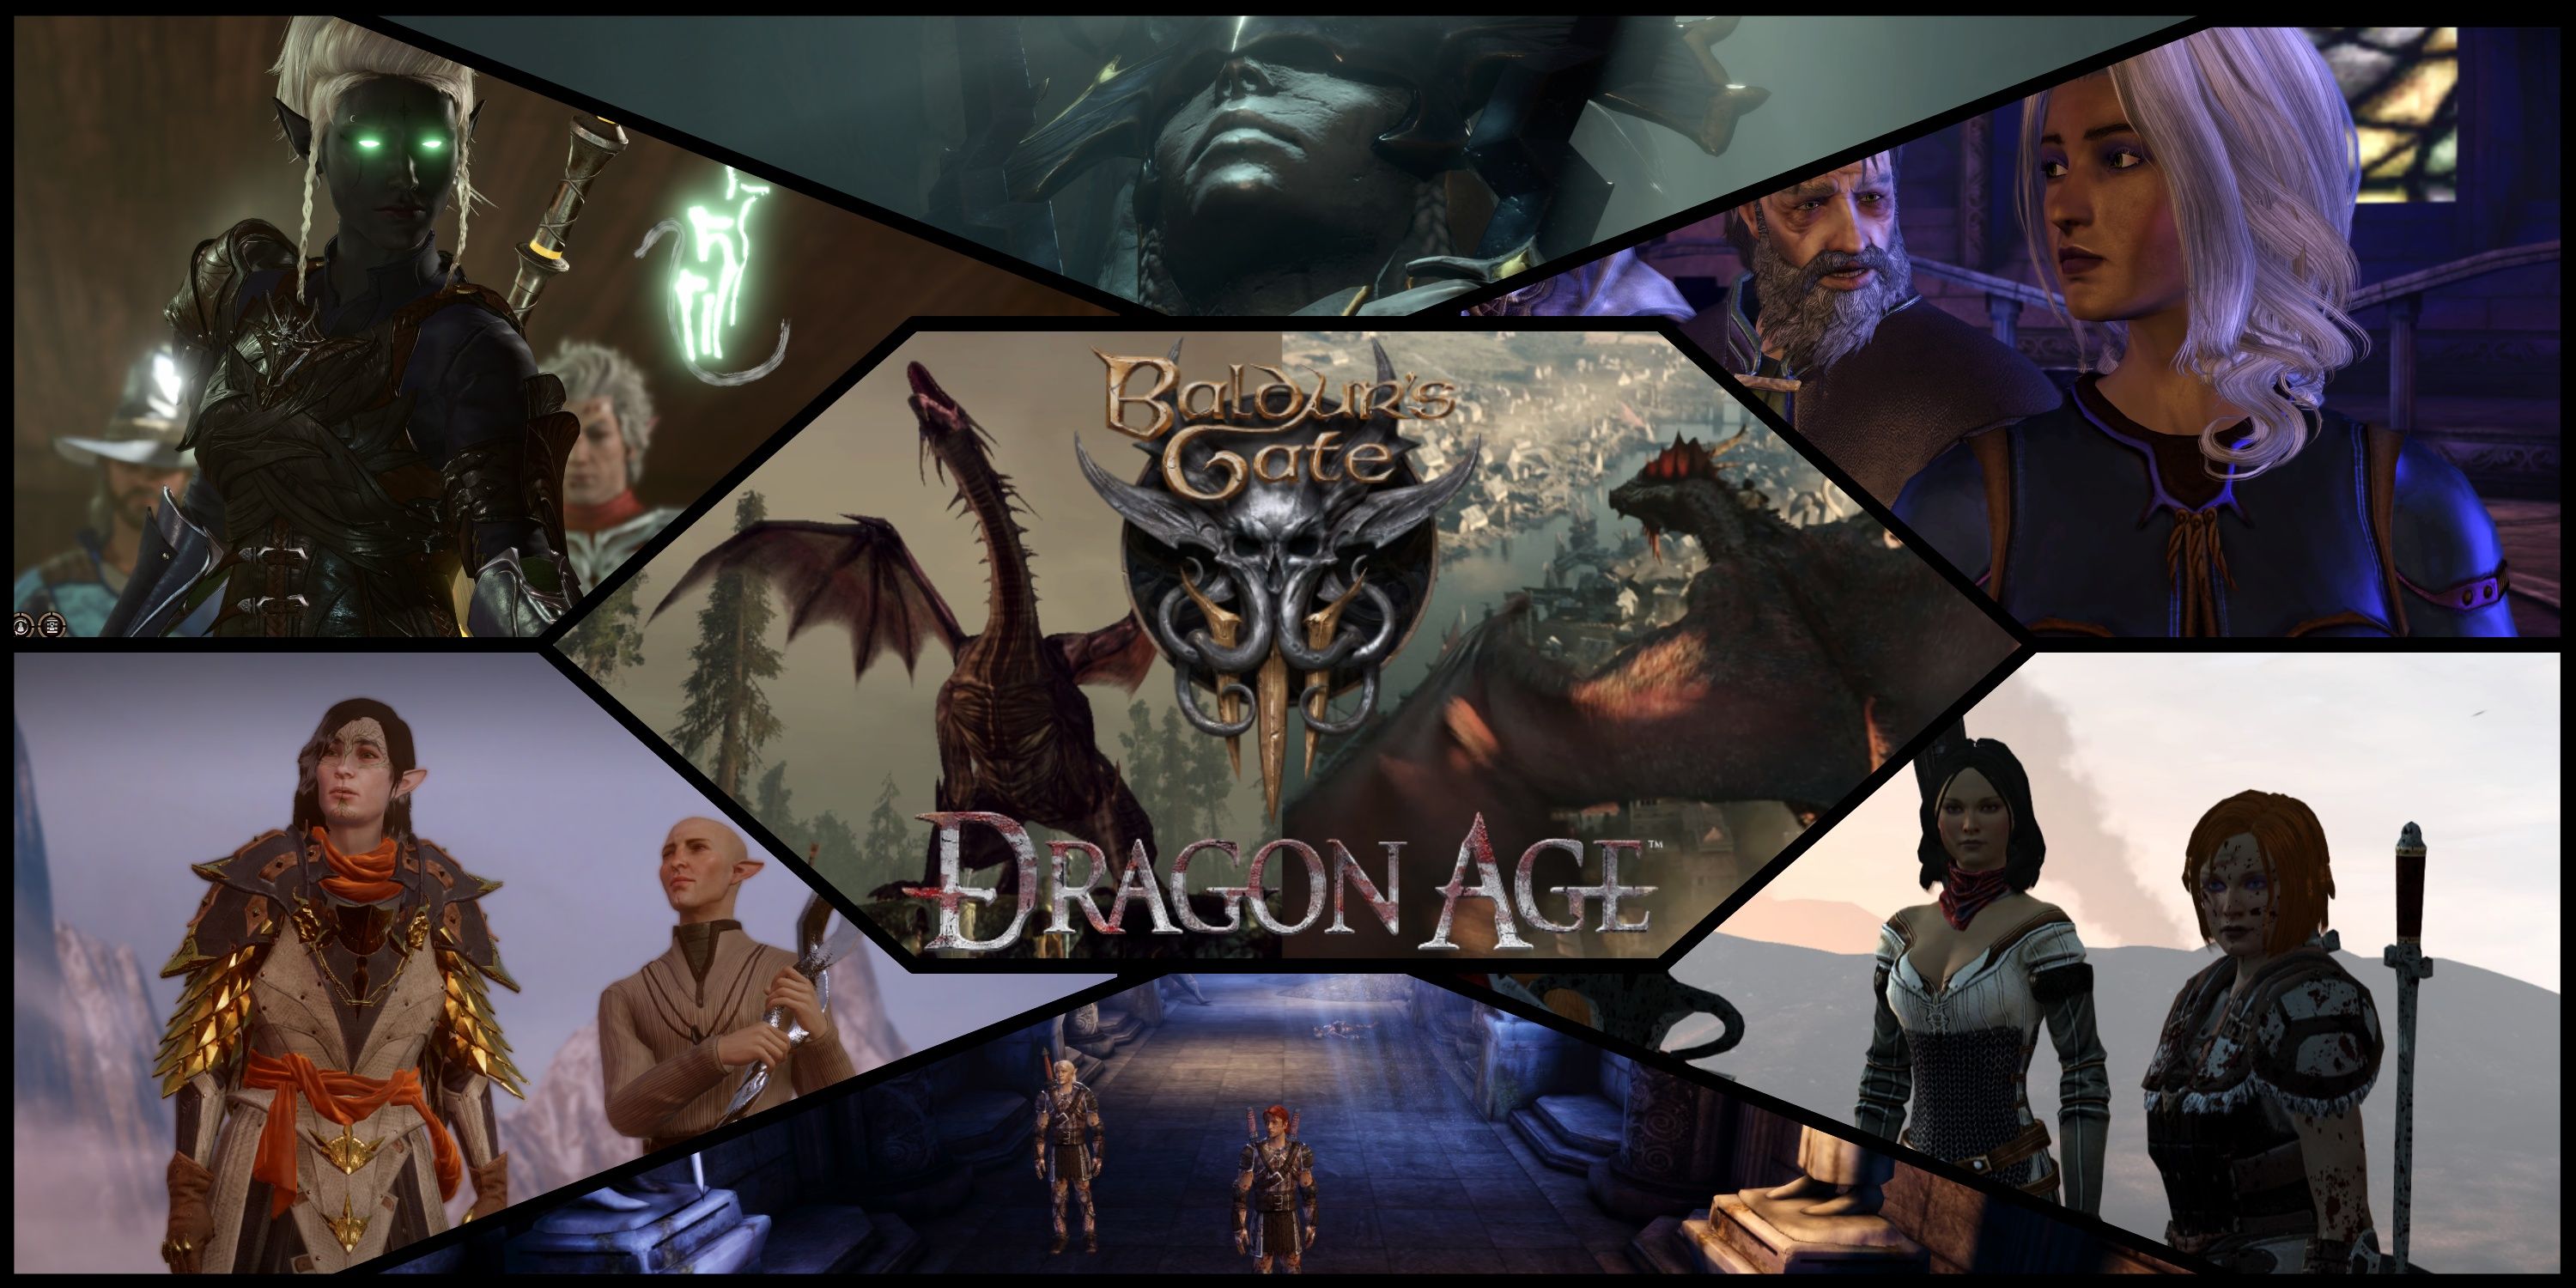 Dragon Age and Baldur's Gate characters, a drow Tav with Astarion and Gale, a statue of Shar, Amell Warden, Hawke and Bethany, Mahariel and Tamlen, and Lavellan and Solas ver2